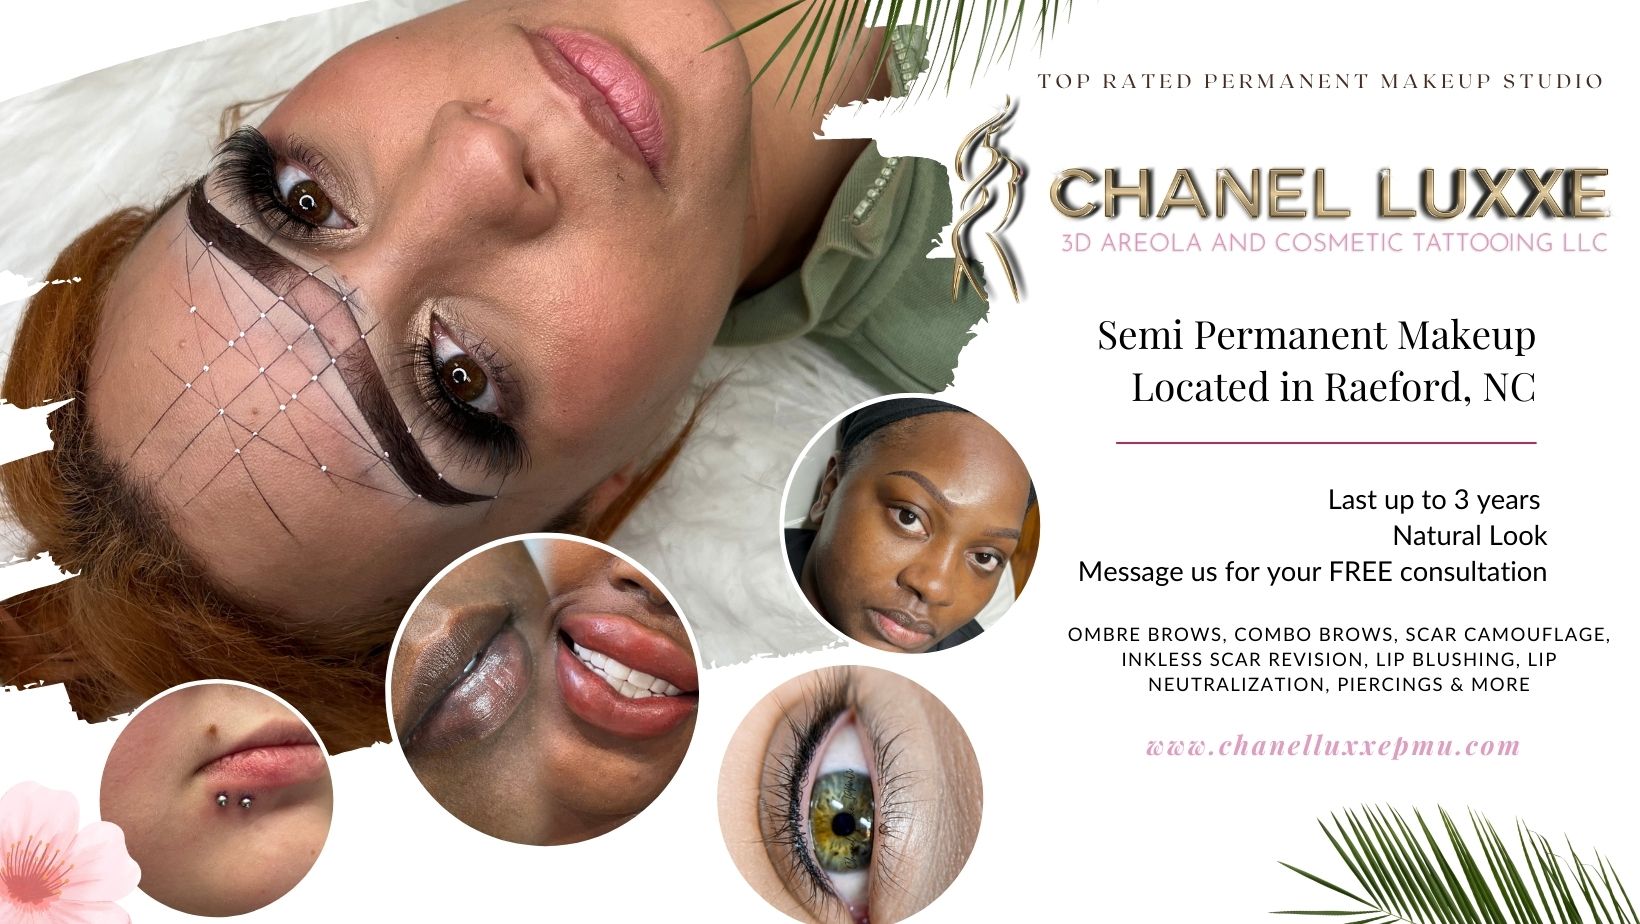 Chanel Luxxe 3D Areola & Cosmetic Tattooing LLC